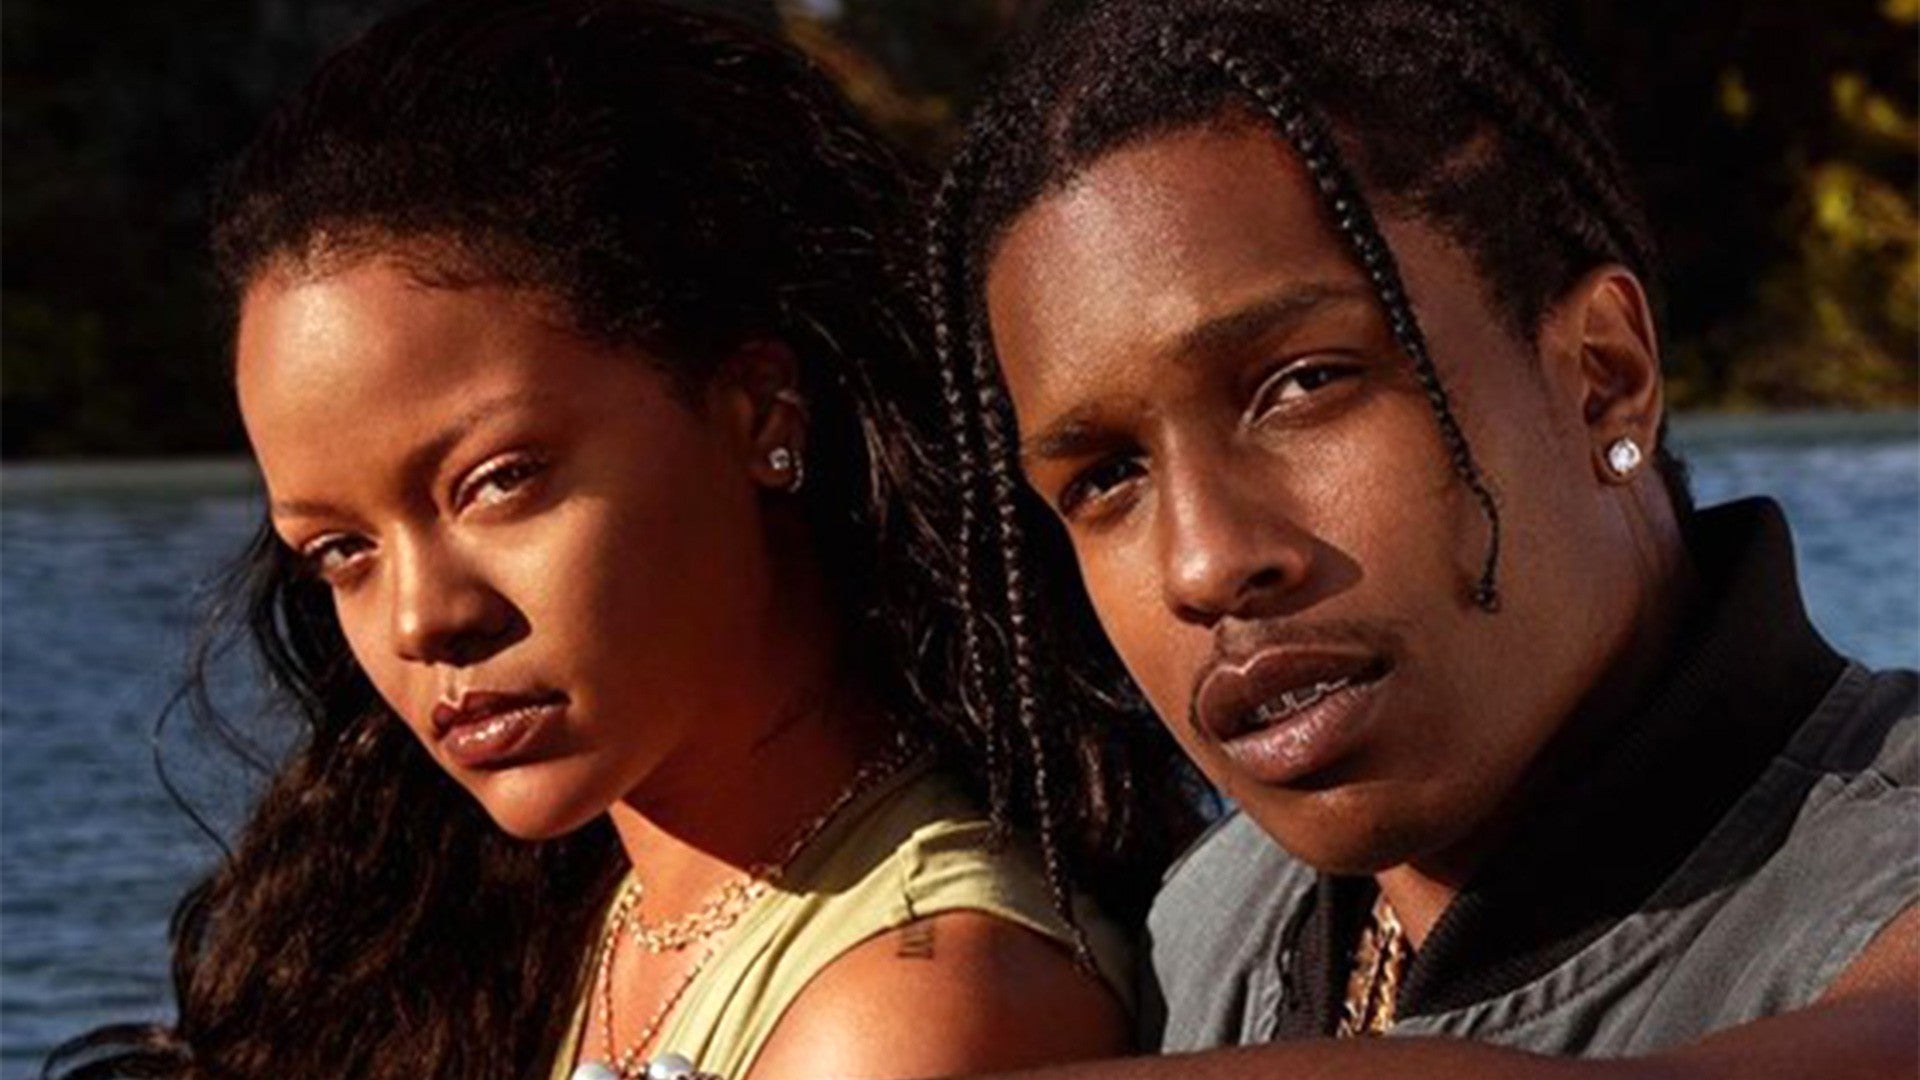 Rihanna says 'obsessed' son favors dad A$AP Rocky